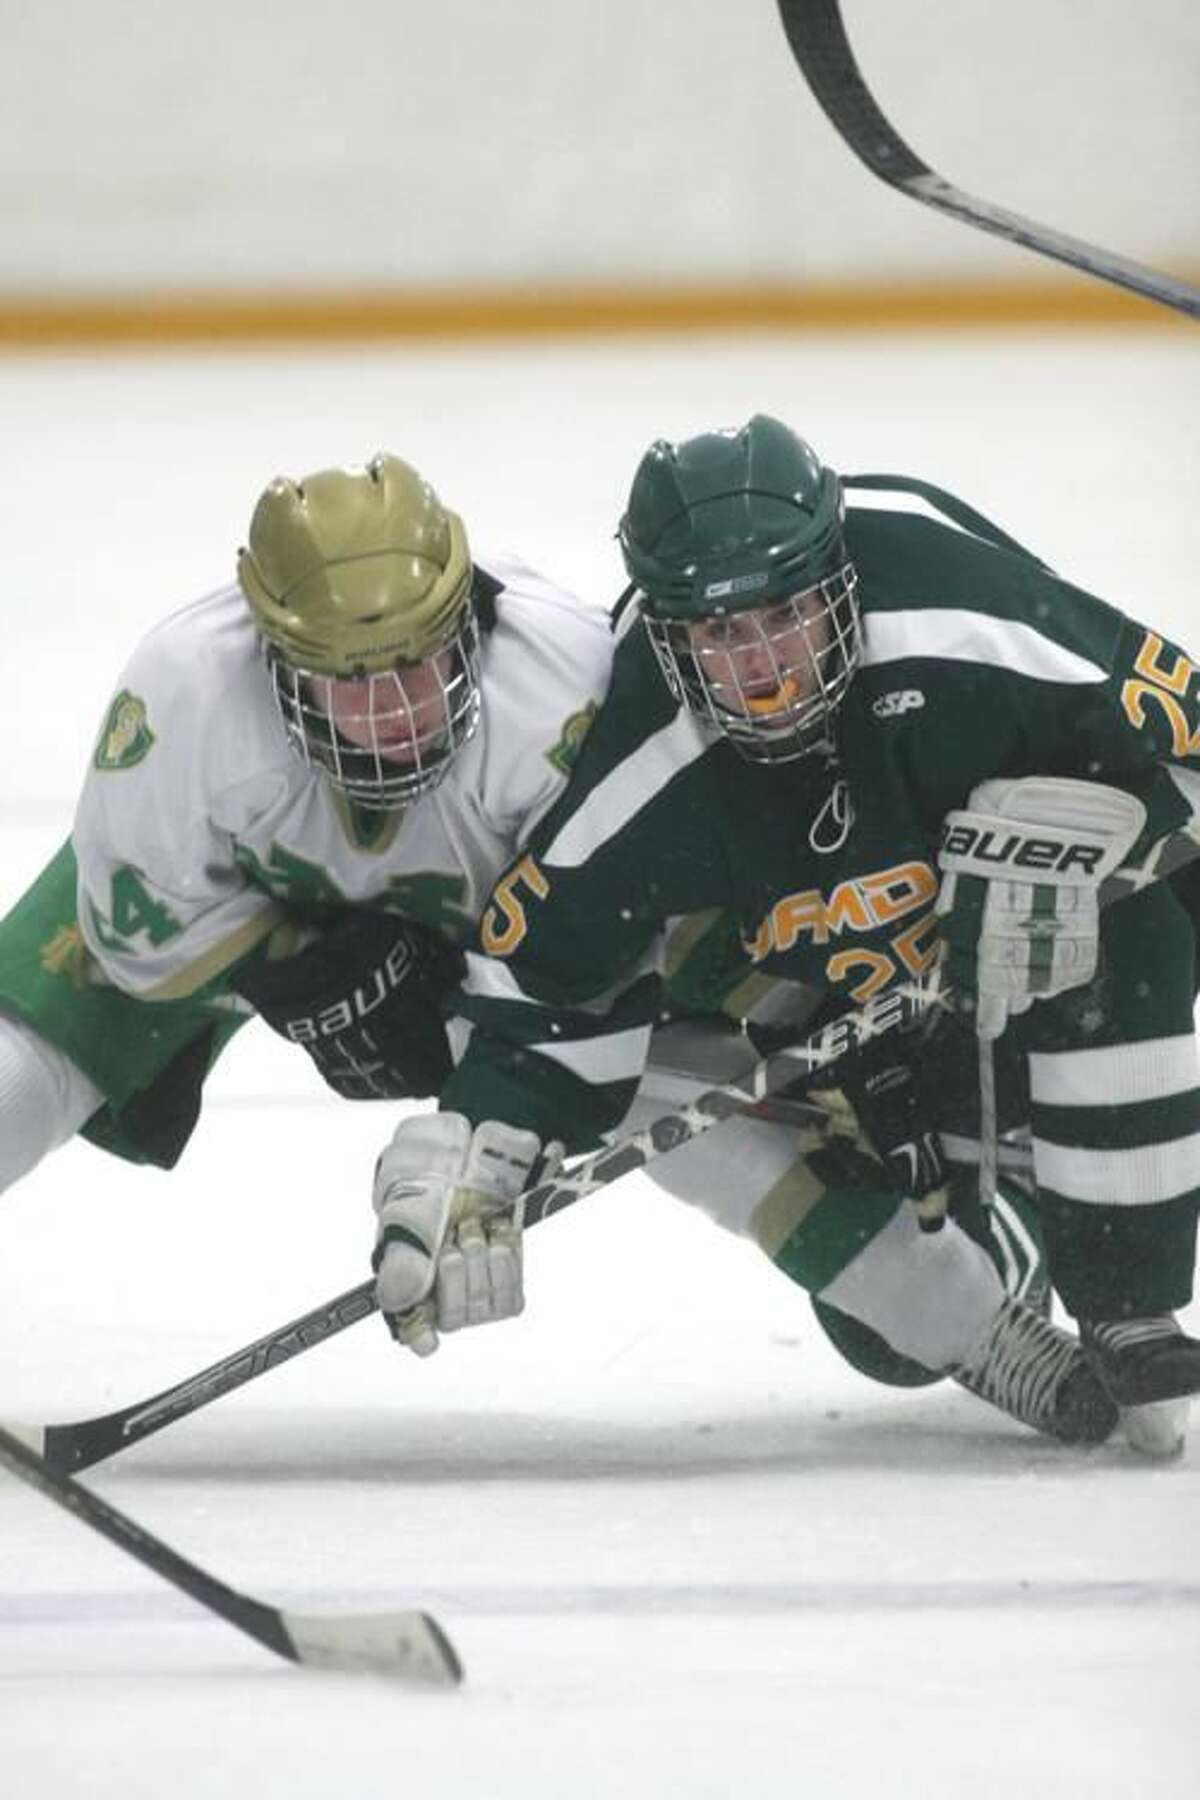 Photo by Russ McCreven Hamden's Vito Puopolo tangles with Notre Dame's Kevin DuBrow in the Green Dragons’ 4-1 victory.